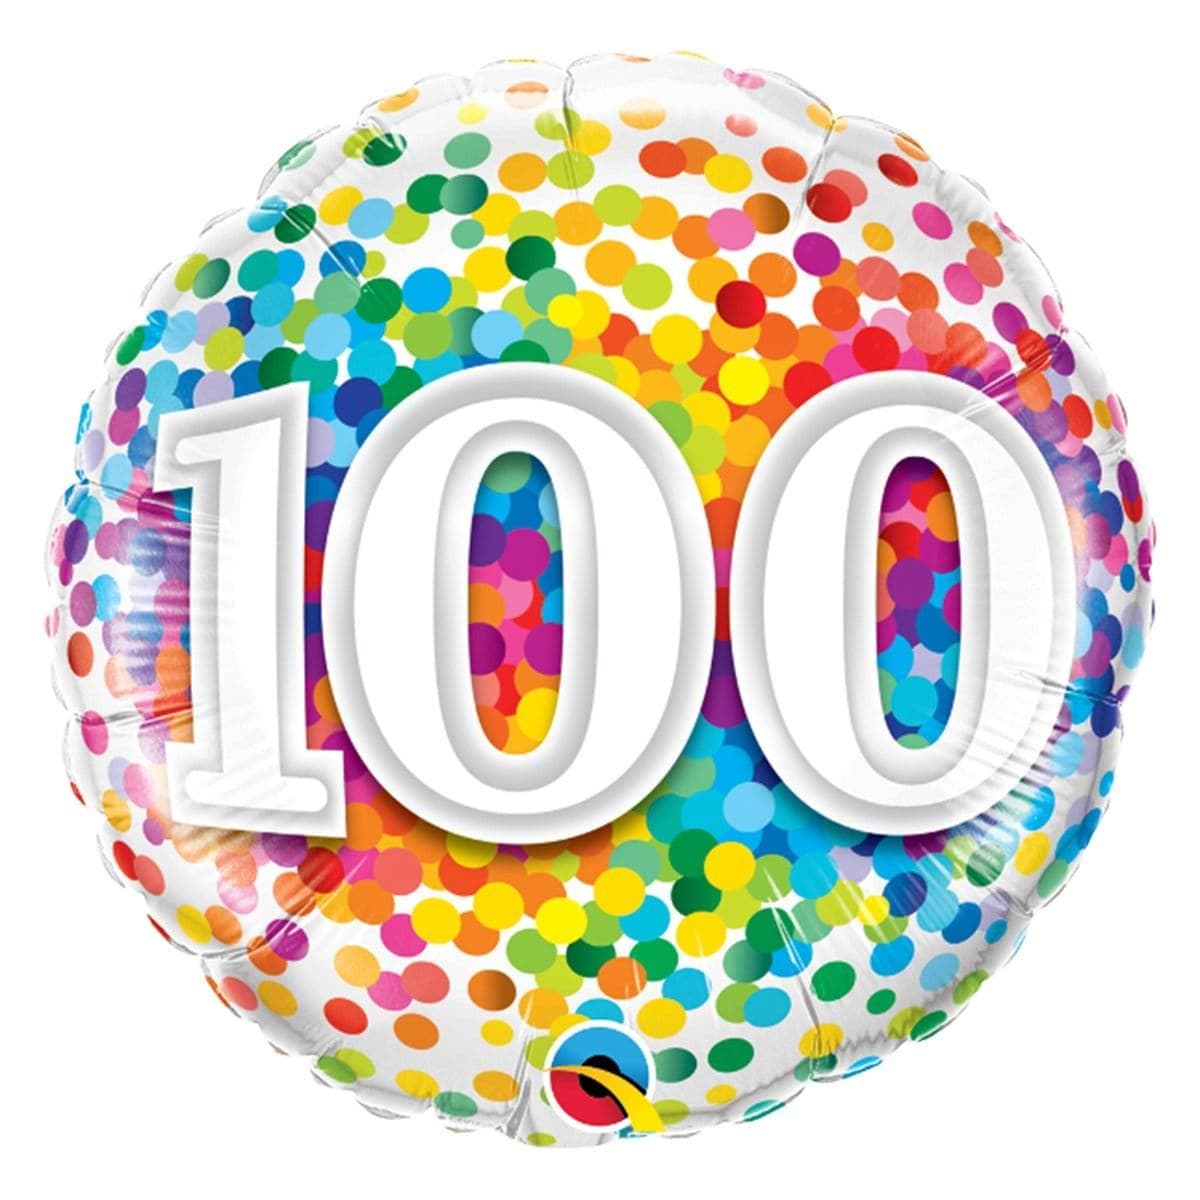 Buy Balloons 100th Birthday Rainbow Confetti Foil Balloon, 18 Inches sold at Party Expert